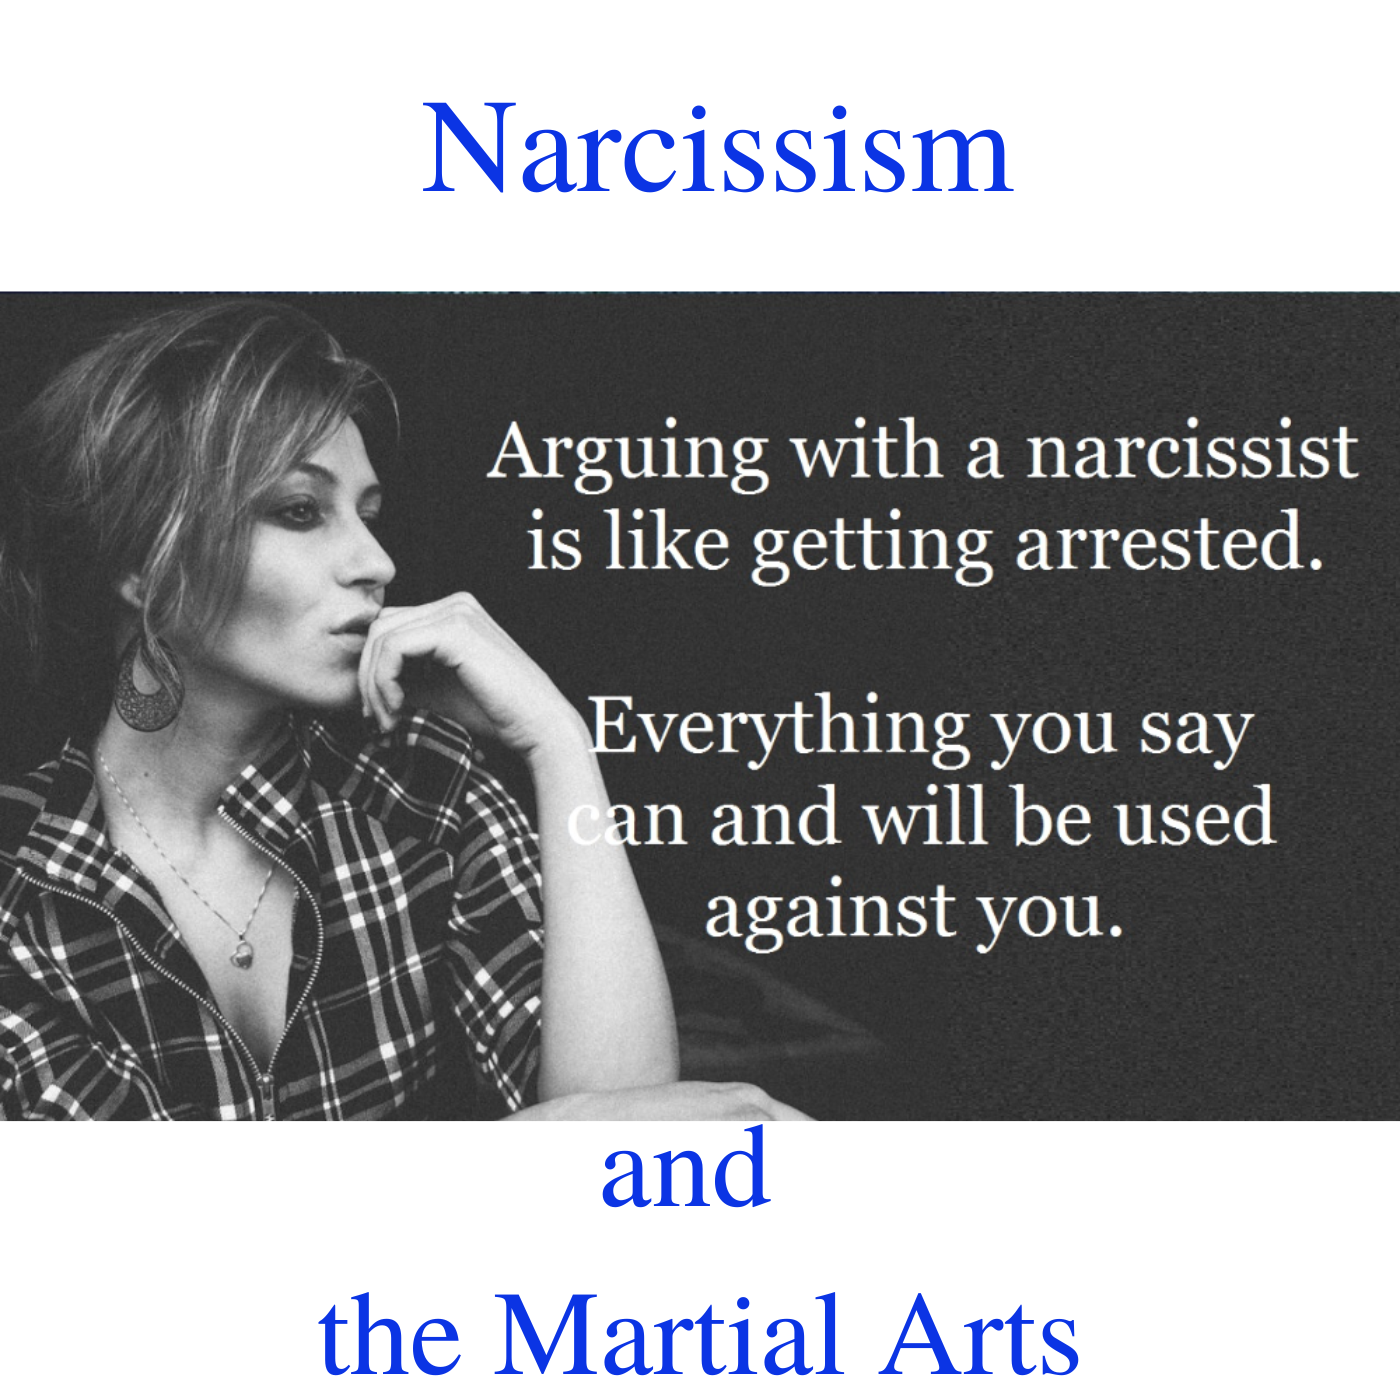 Narcissism and the Martial Arts